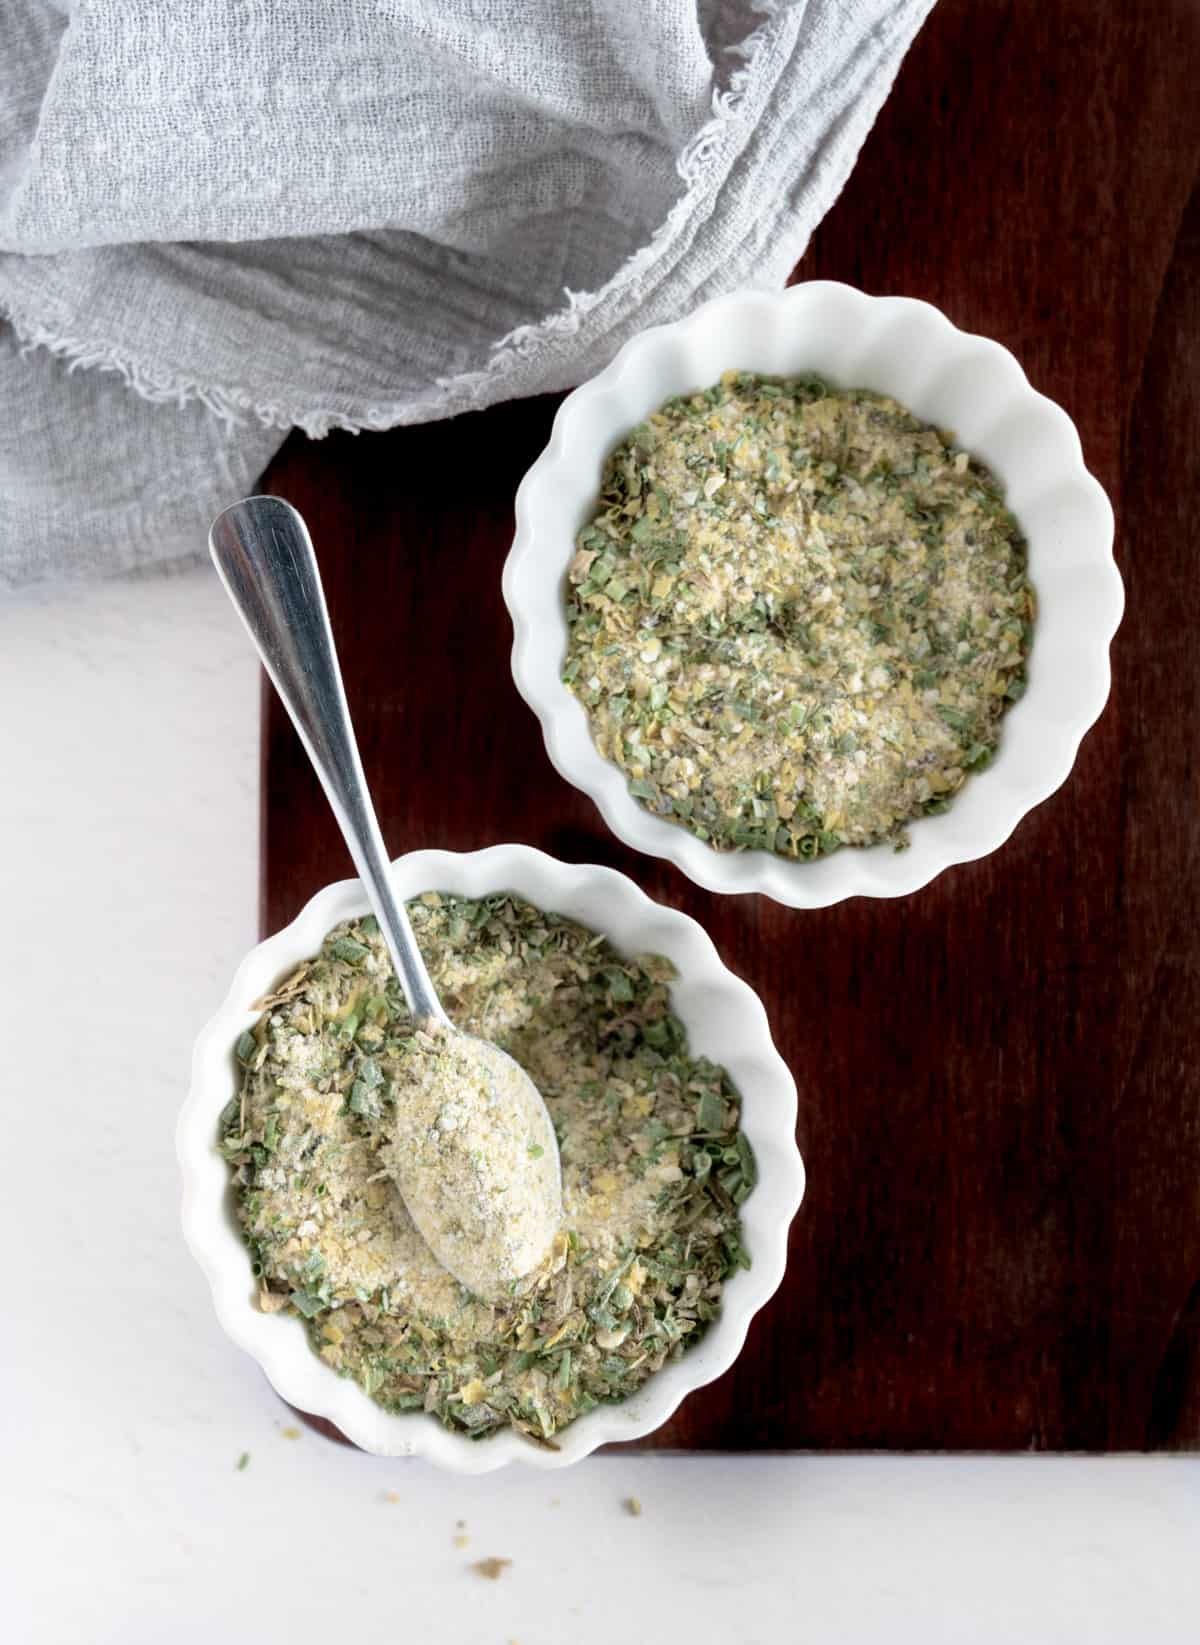 two white bowls with dried herbs mixed through a light yellow powder